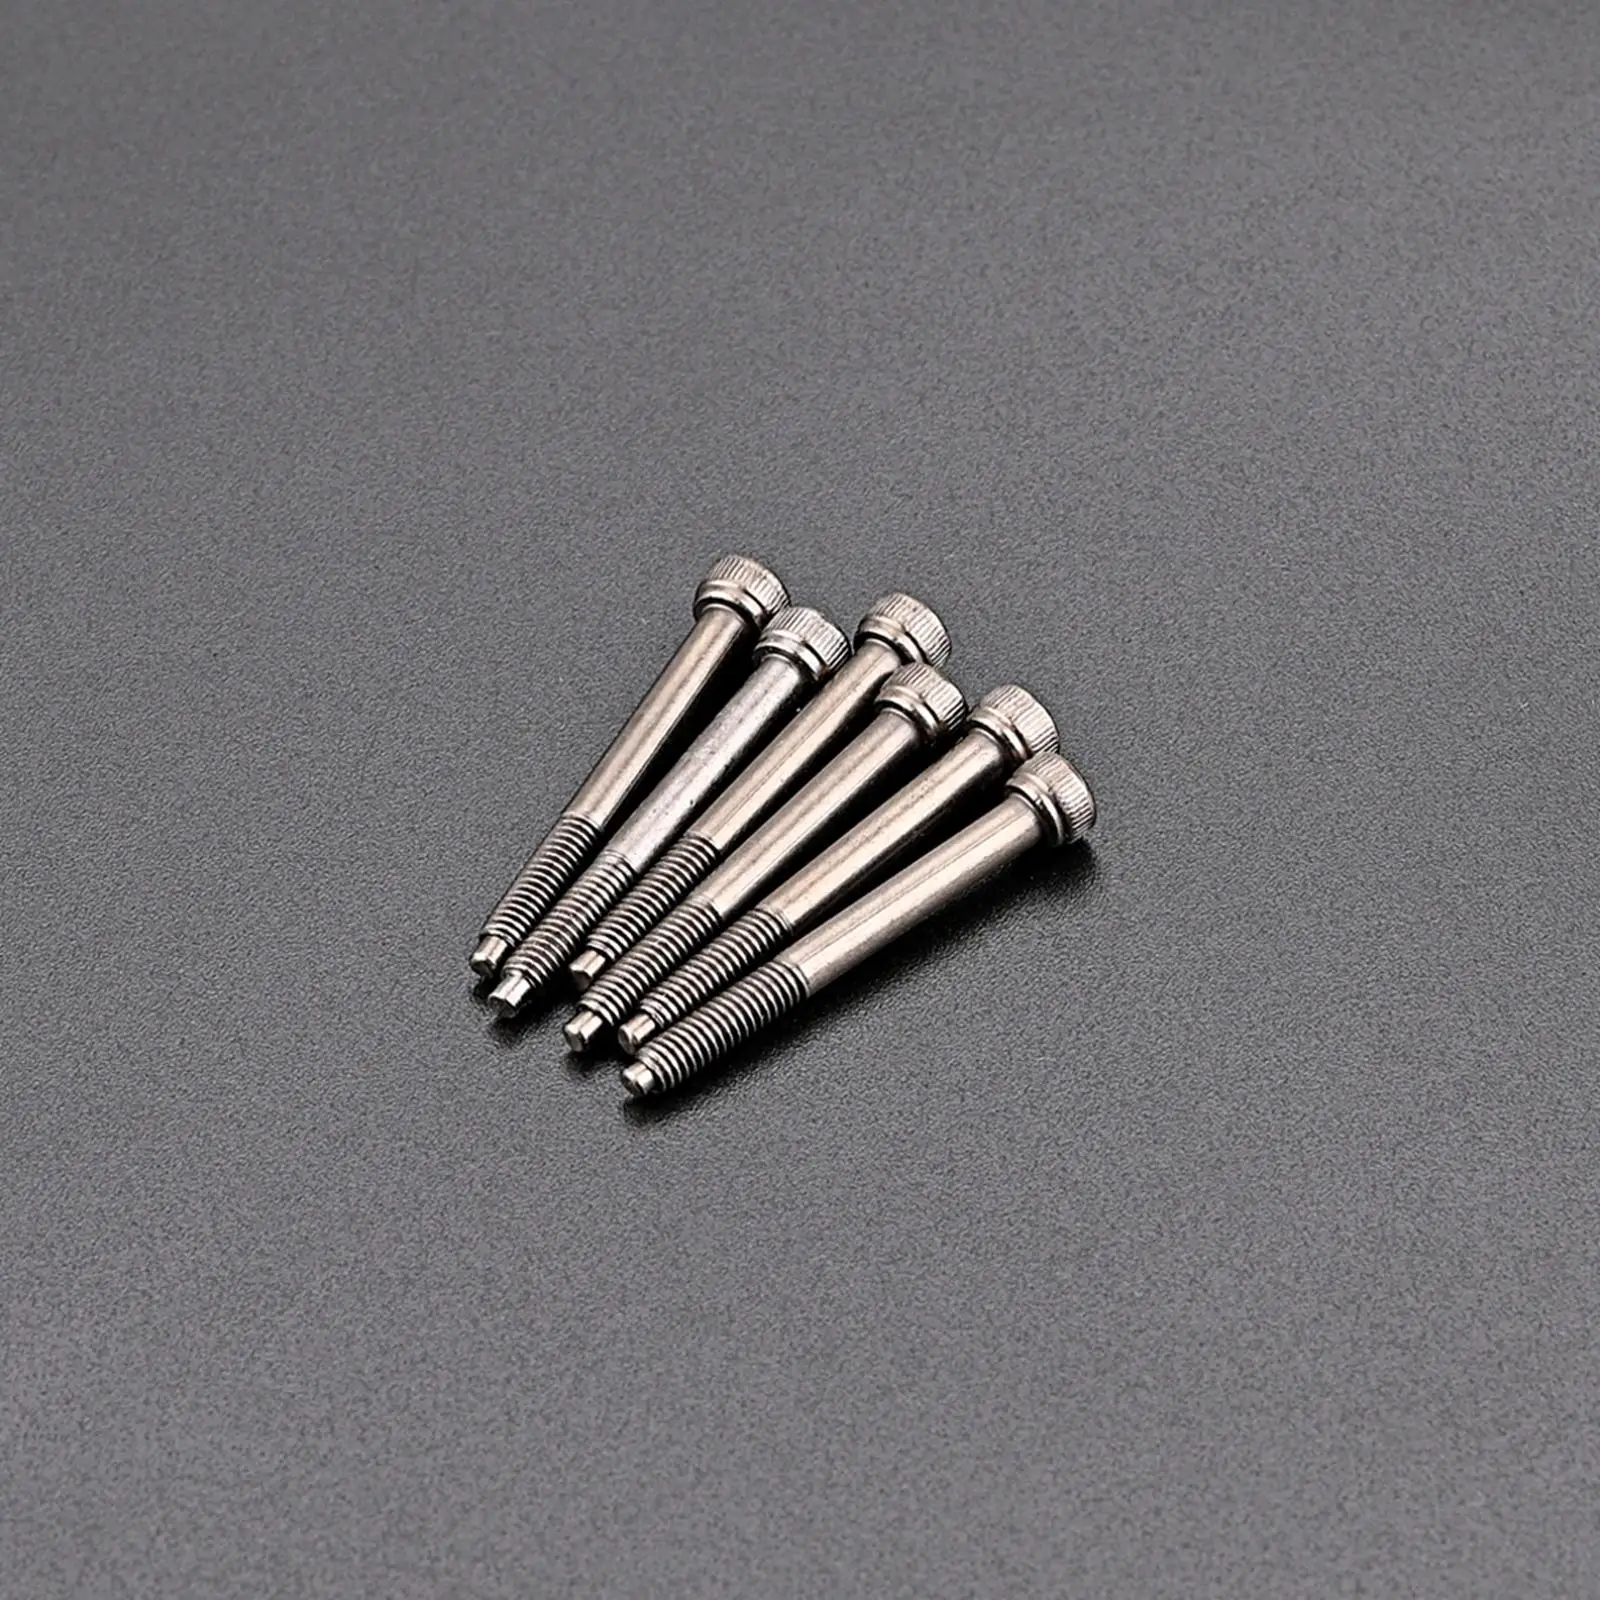 6x Guitar Pickup Screws 42mm Durable Instruments Replacement Parts for Electric Guitar